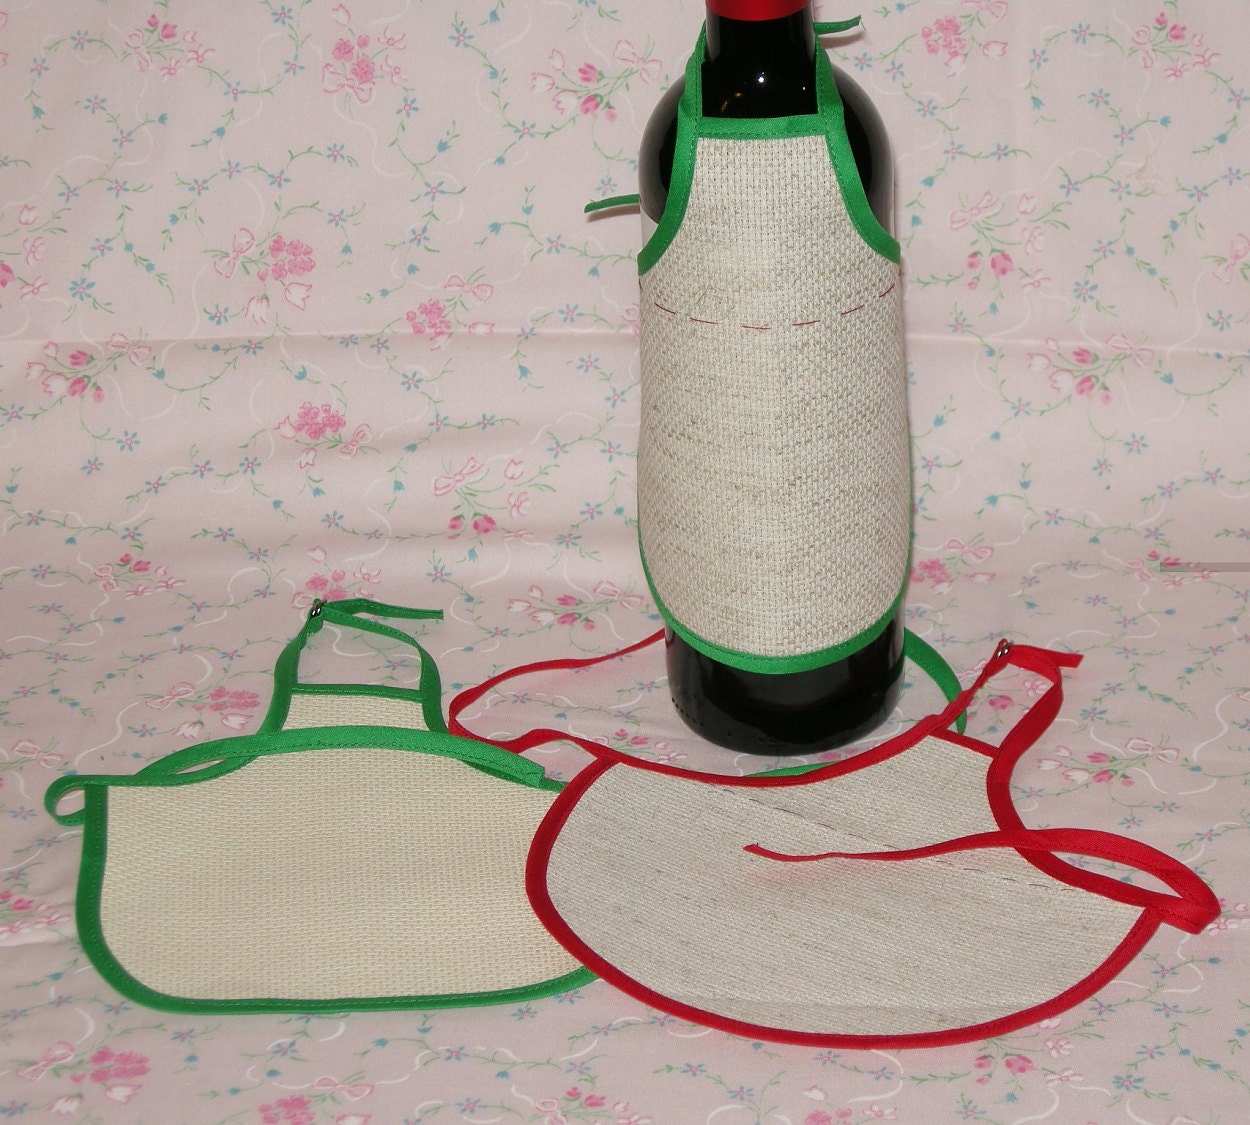 Blank Wine Bottle Aprons to Embroider - Handmade in 14 count Aida ...